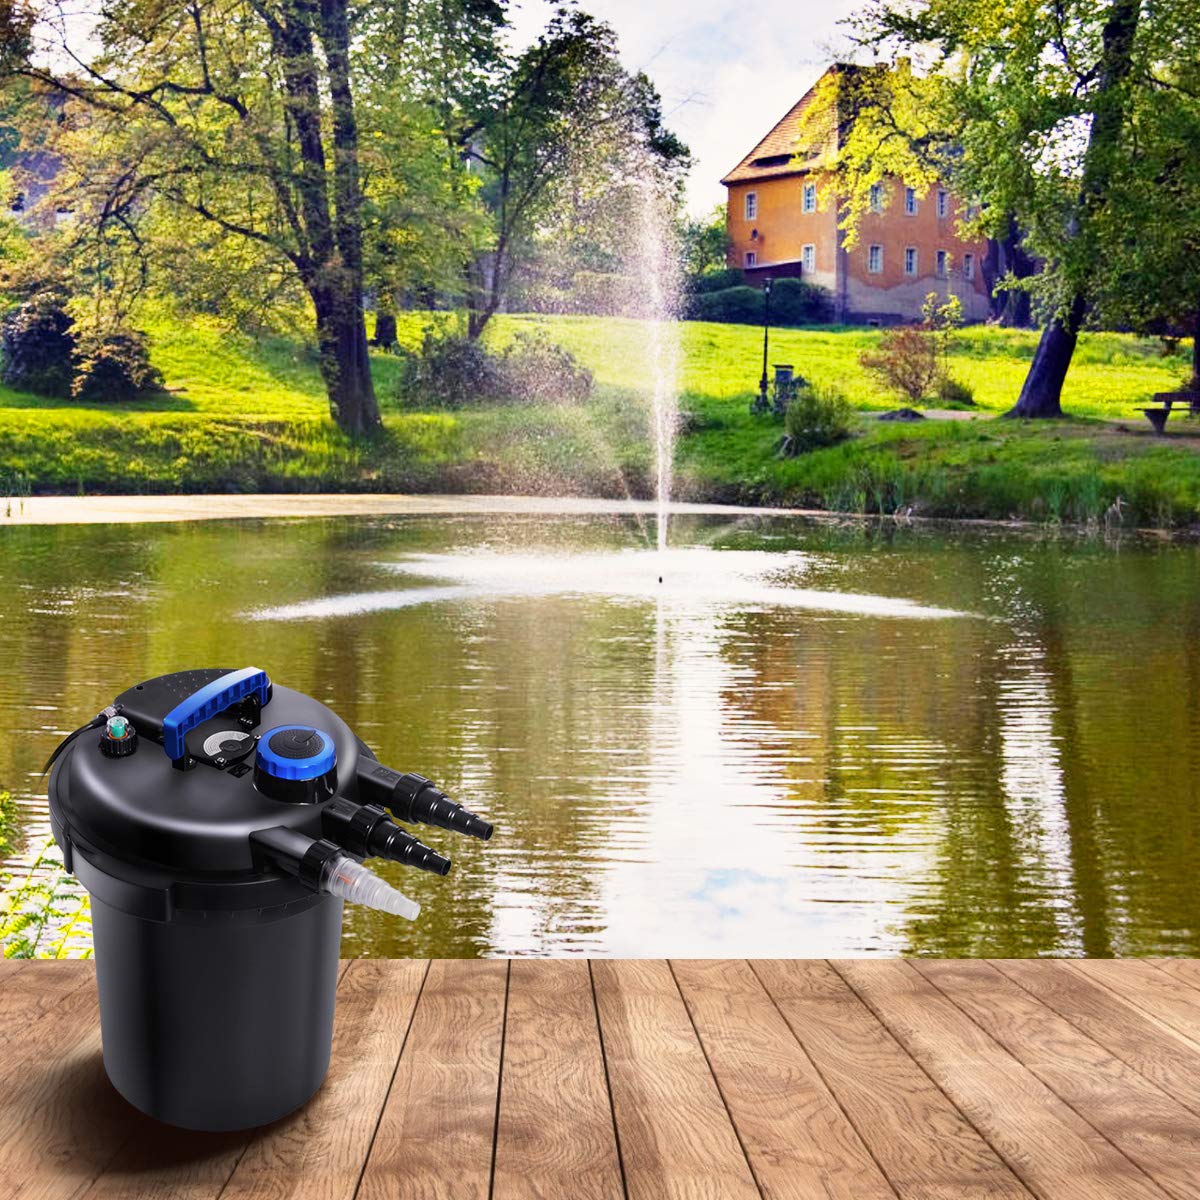 HAPPYGRILL Pond Filter 4000 Gallons Pond Pressure Bio Filter with 13W UV Light Fishpond Pump Filter for Garden Pool